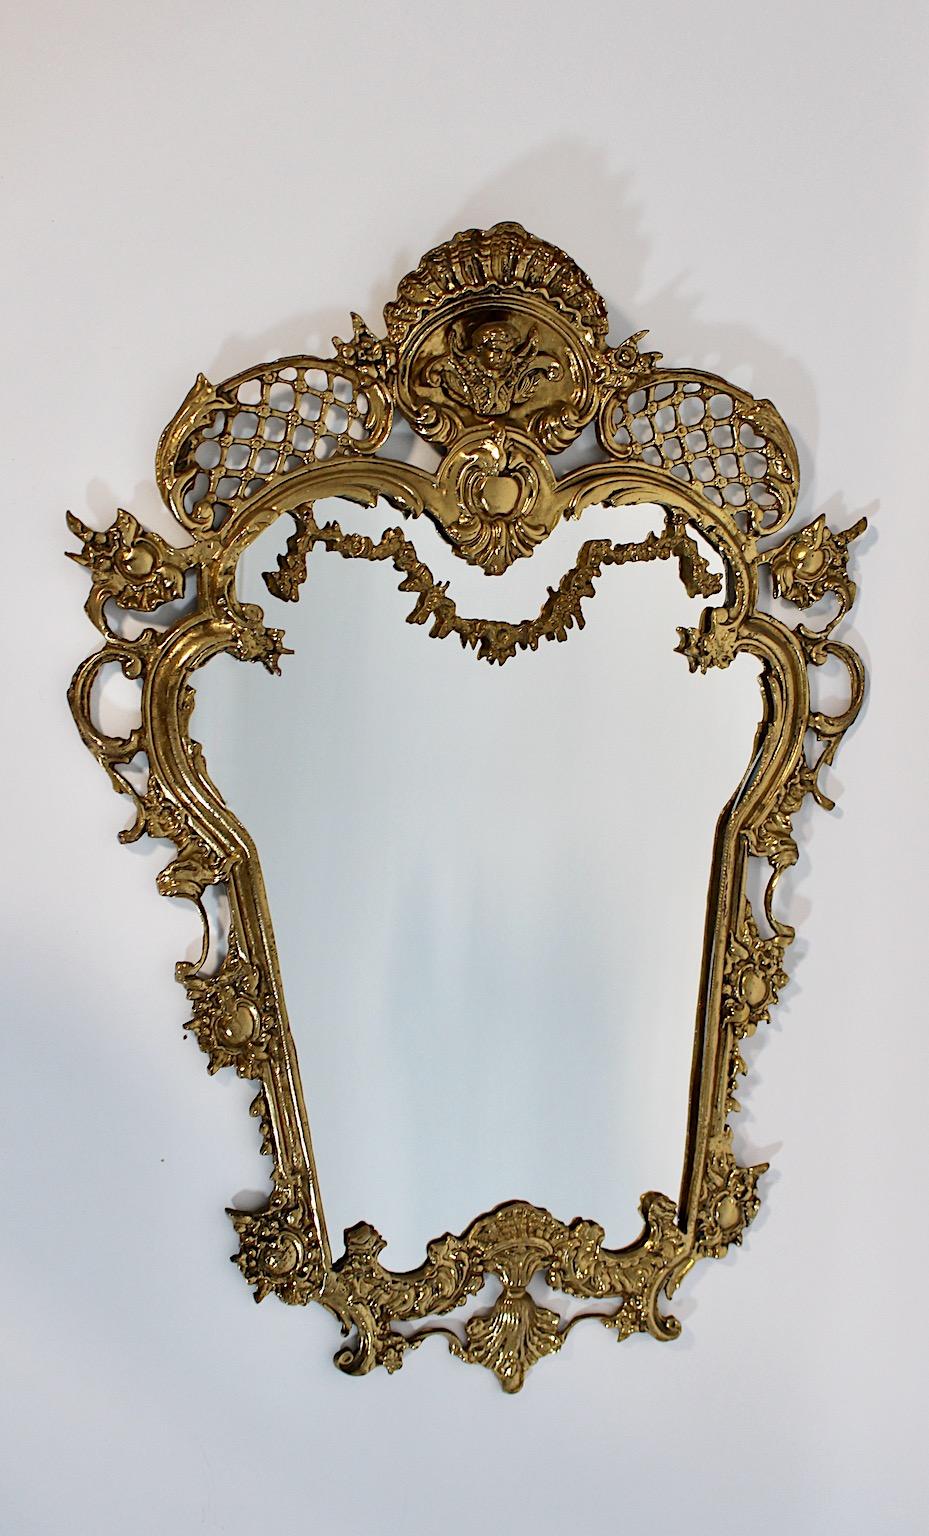 20th Century Modern Vintage Brass Wall Mirror Style Baroque Revival Italy 1970s For Sale